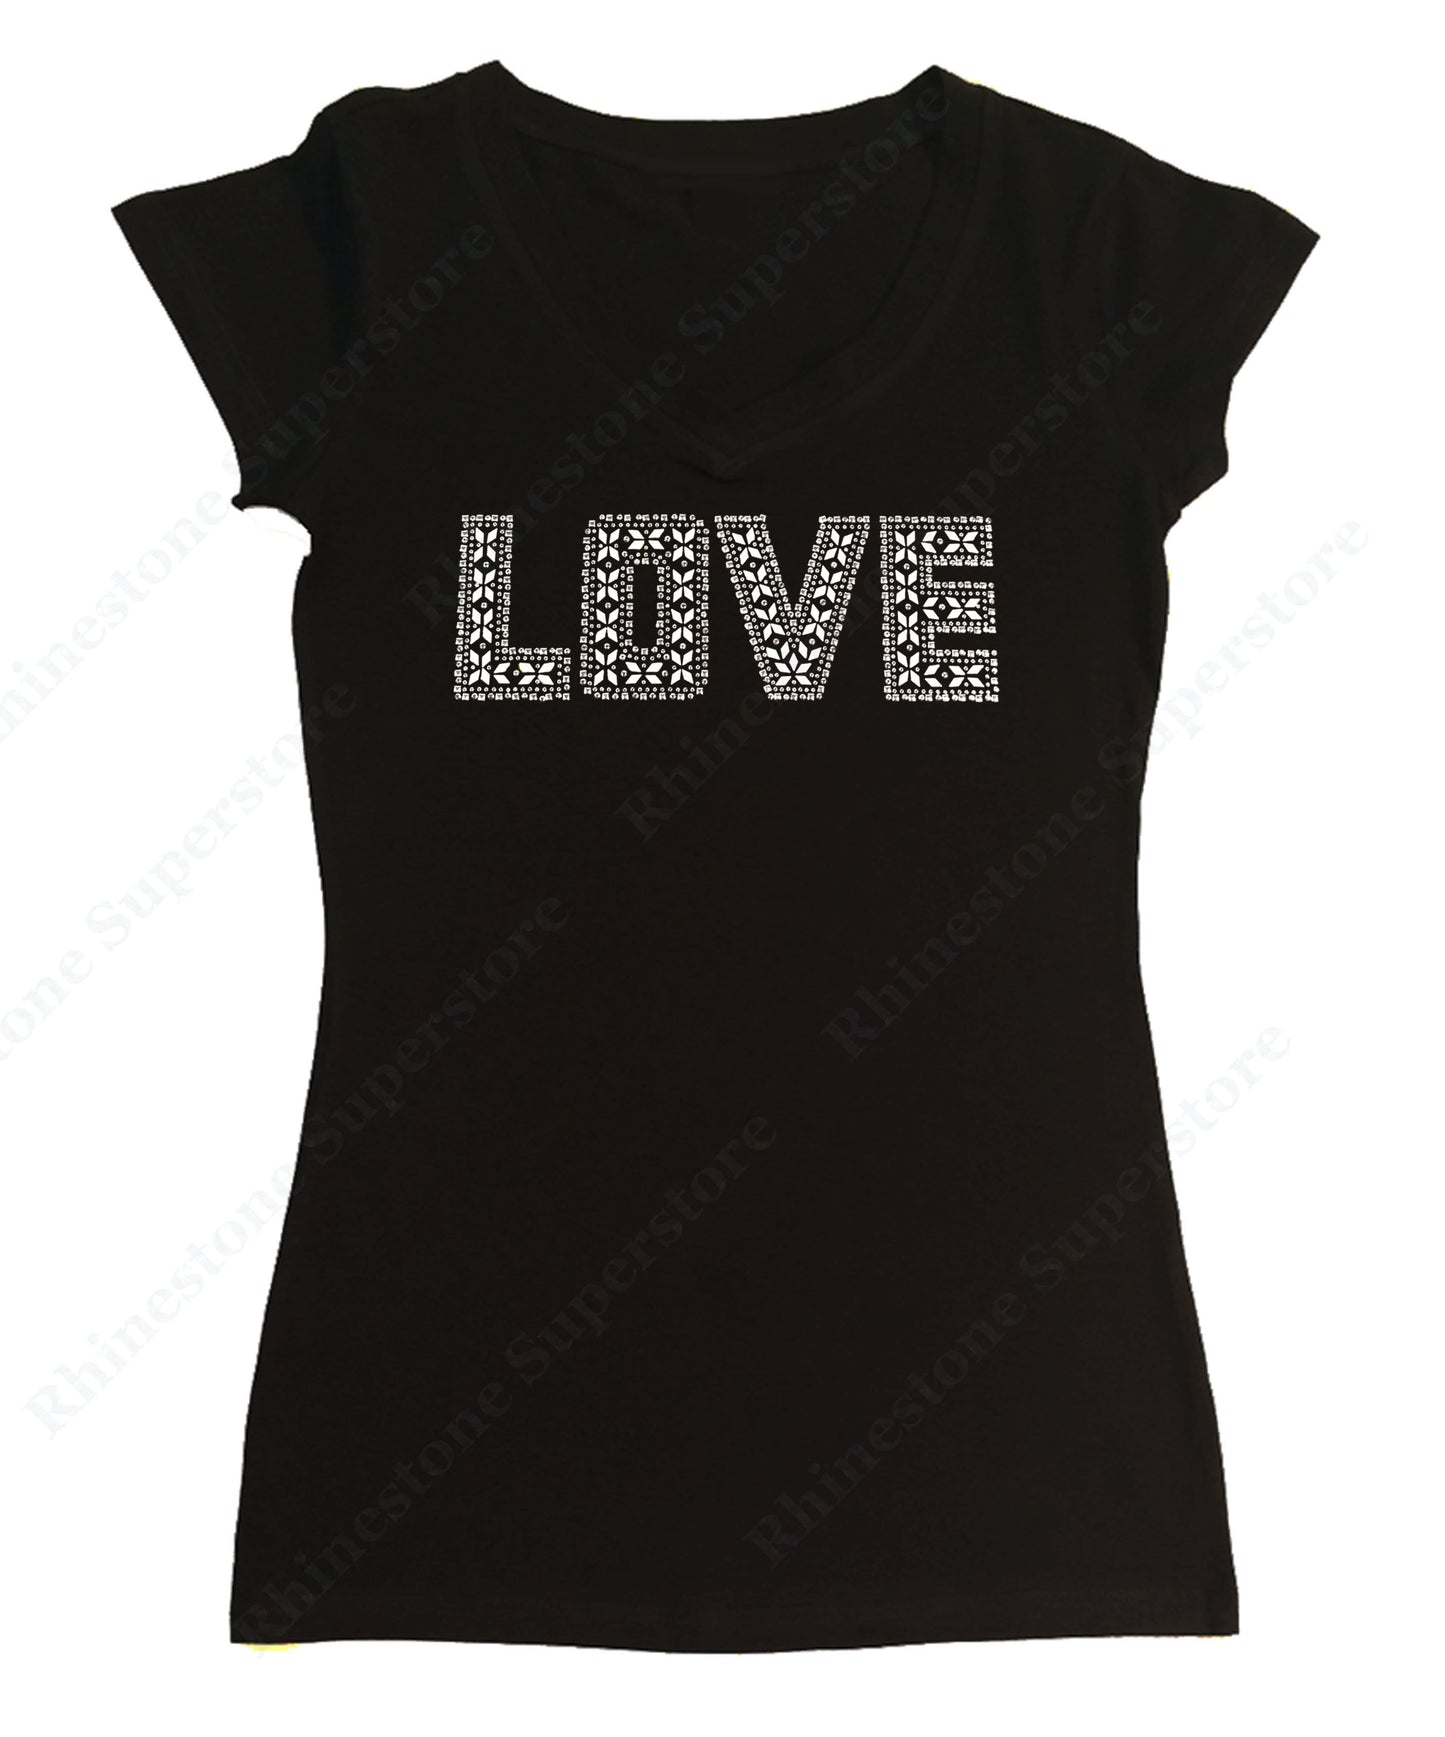 Womens T-shirt with Silver Love in Rhinestuds